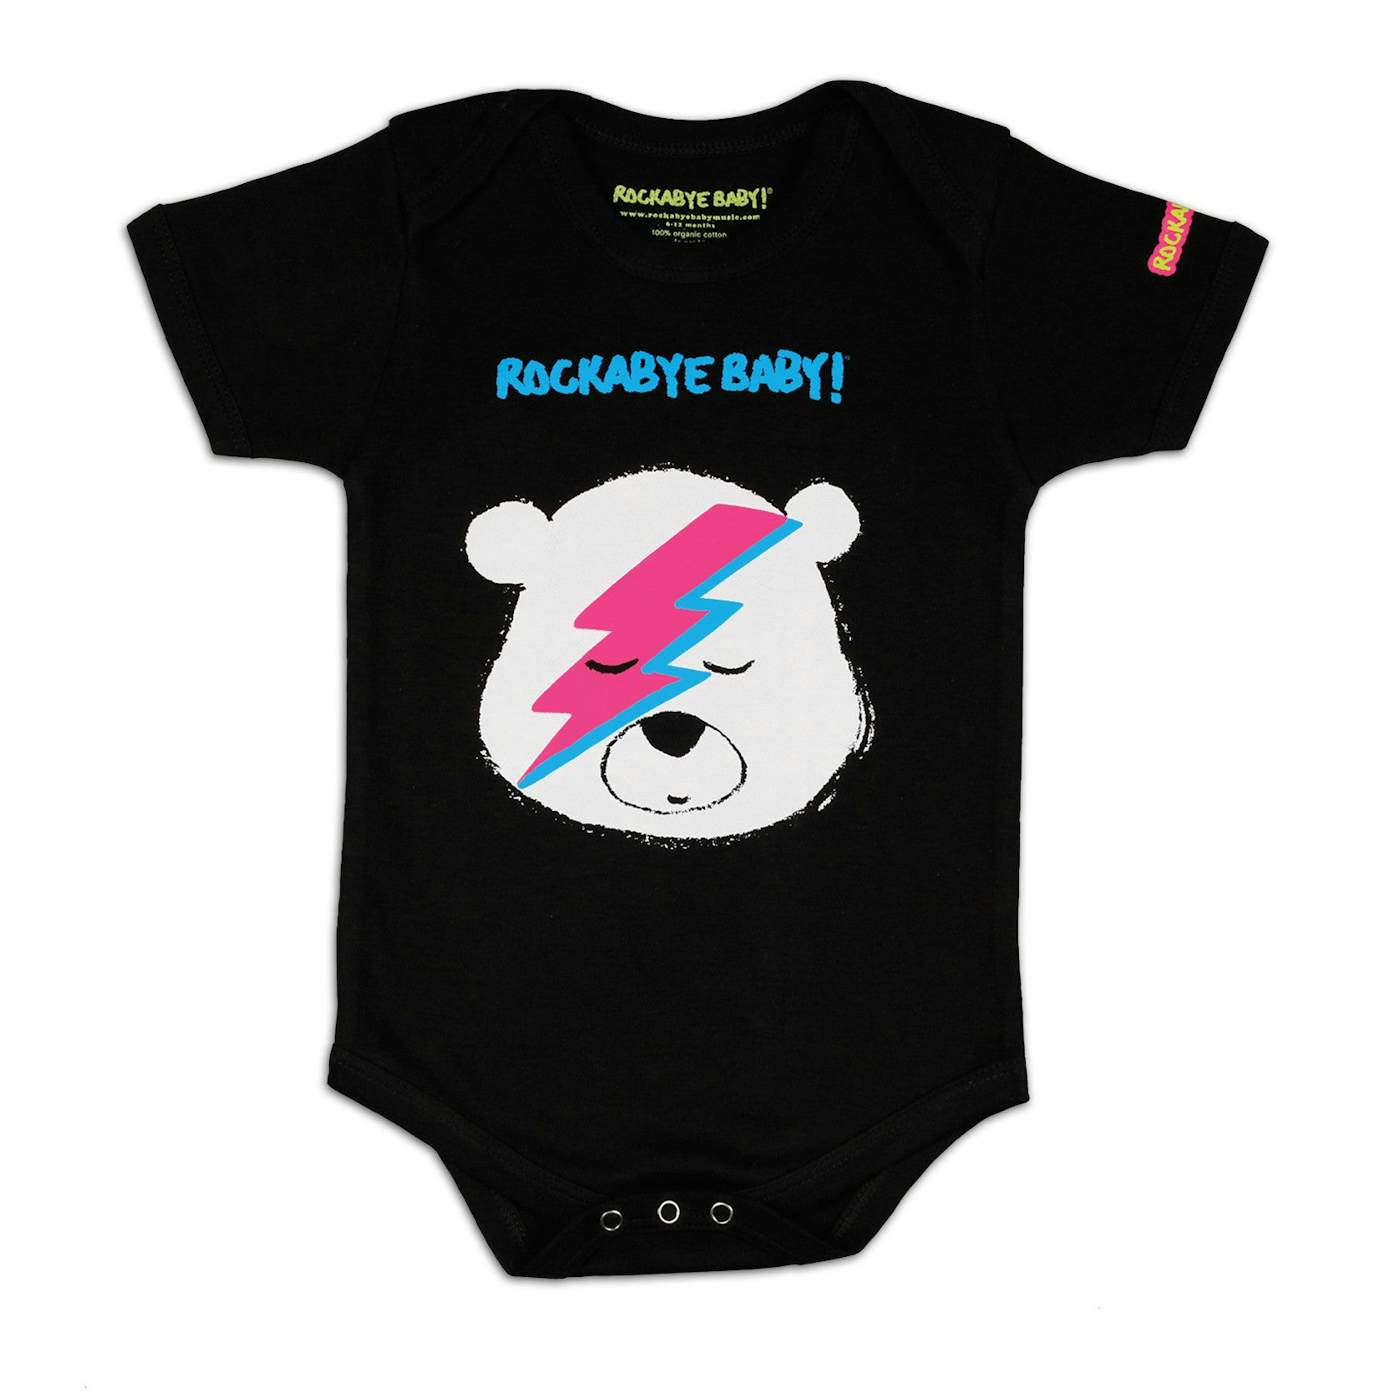 Rockabye Baby! Organic Baby Bodysuit ("Lullaby Renditions of David Bowie" Album Art on Black or White)